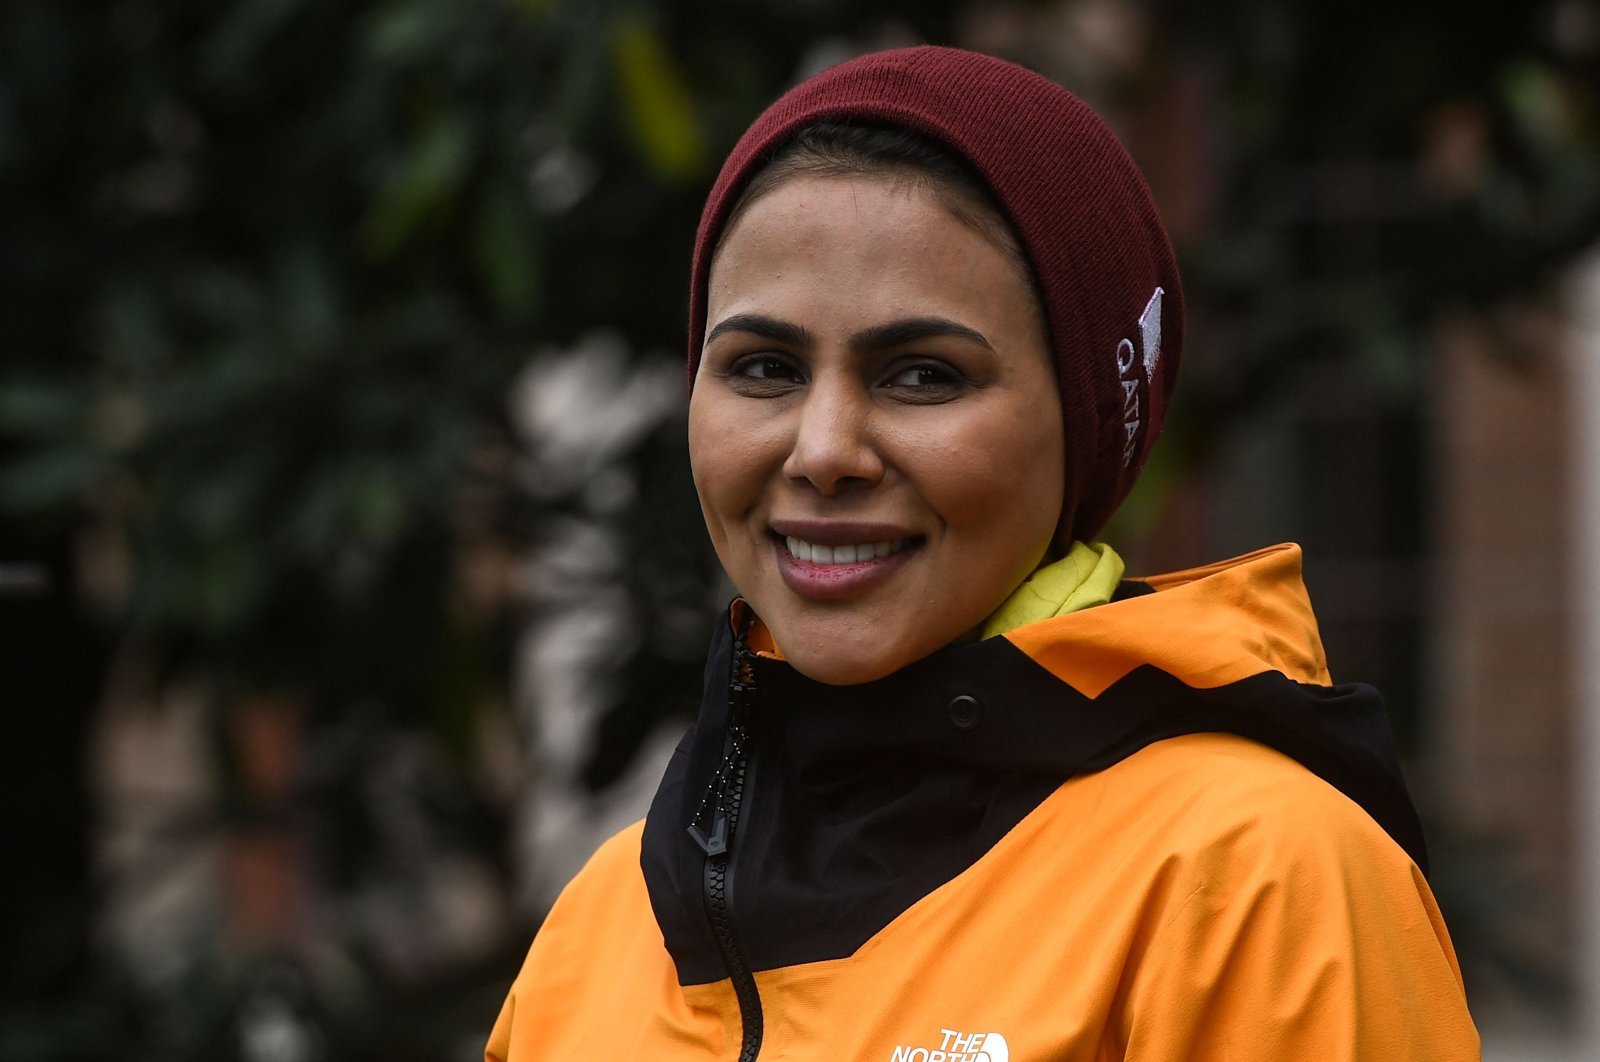 Qatari climber Sheikha Asma Al Thani, who aims to become the first Qatari woman to climb Mount Everest, poses for a picture after an interview in Kathmandu, Nepal, April 1, 2021. (AFP Photo)